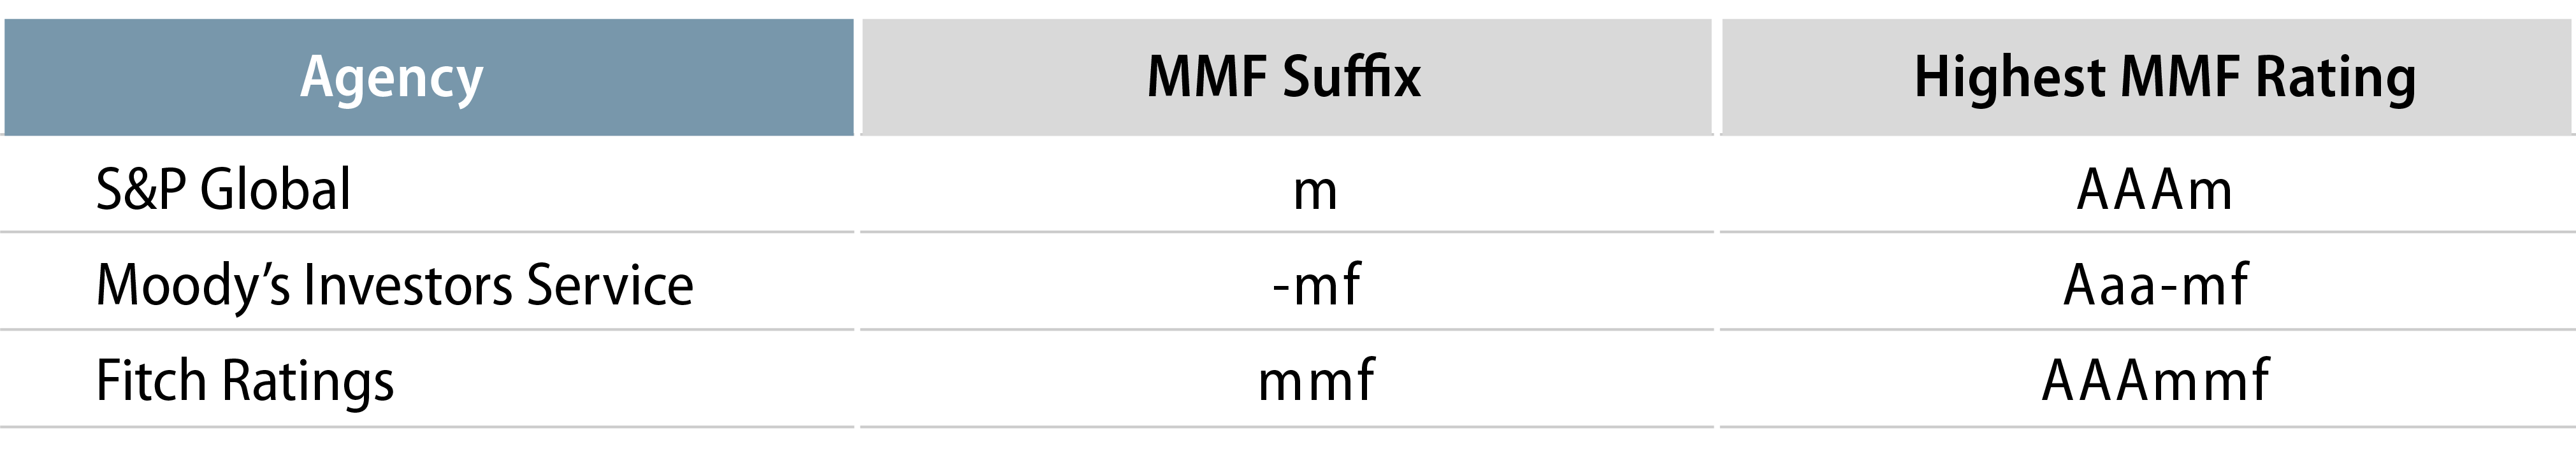 Money Market Fund Suffix and Rating by Agency